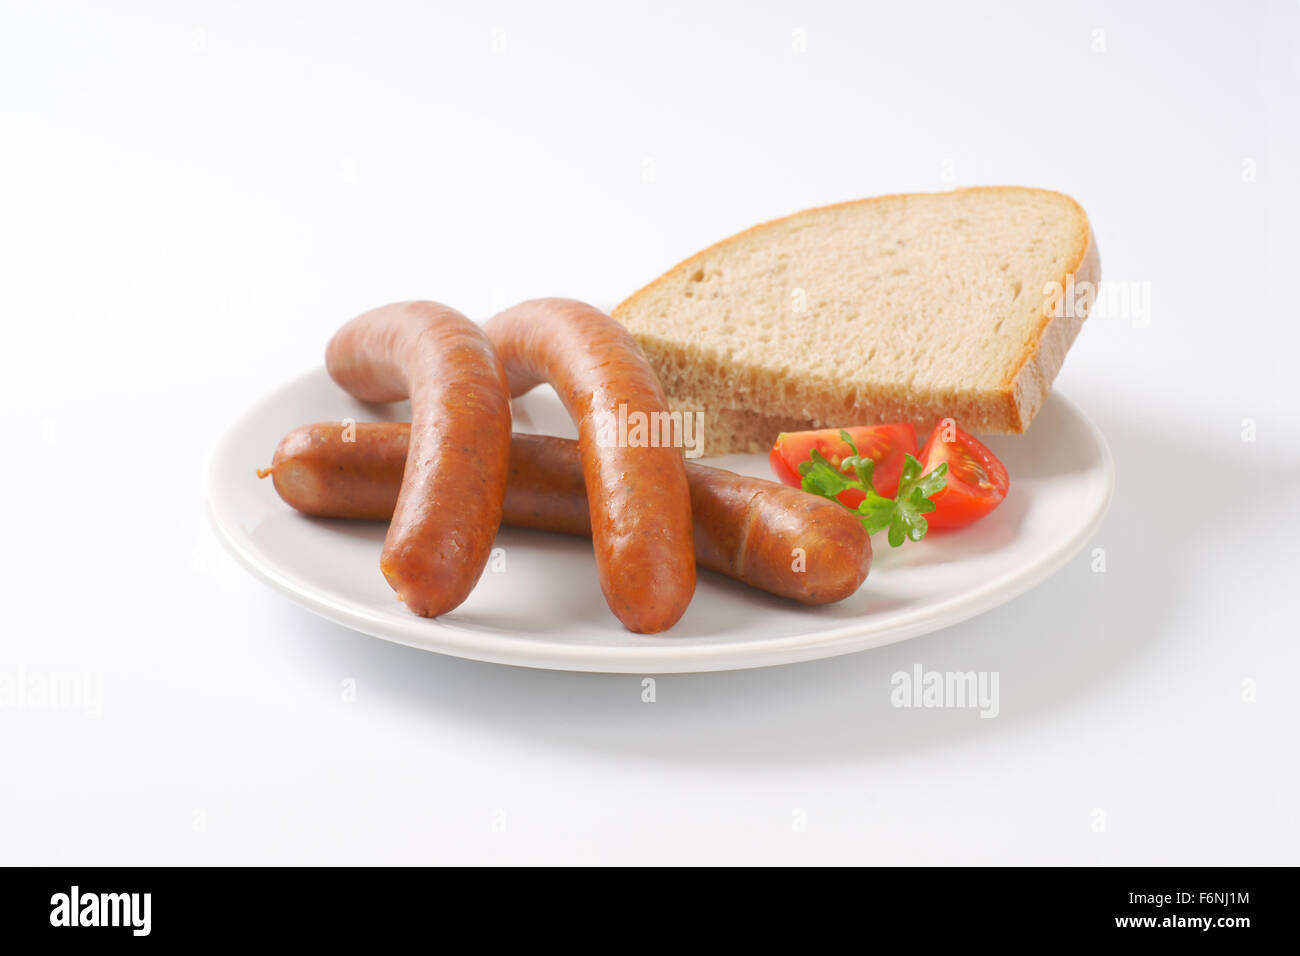 hot frankfurter sausages and slice of bread on white plate Stock Photo